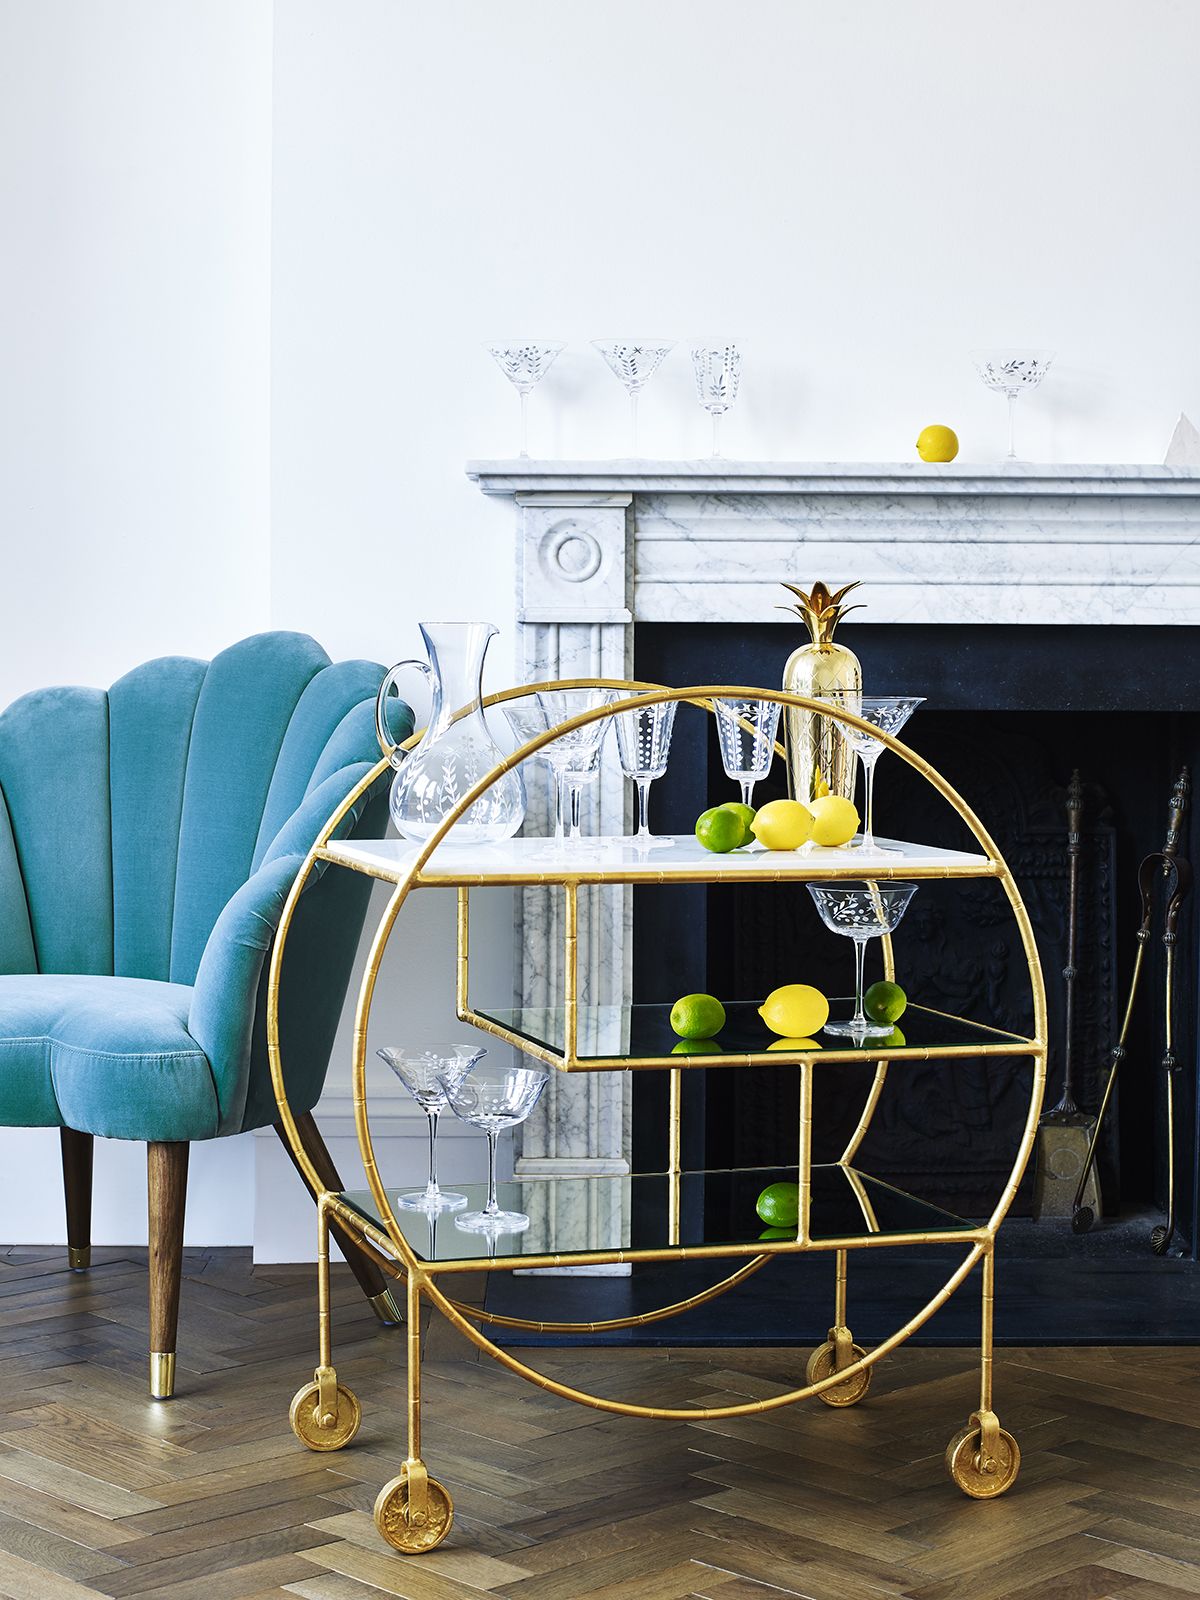 The best bar carts for your home bar